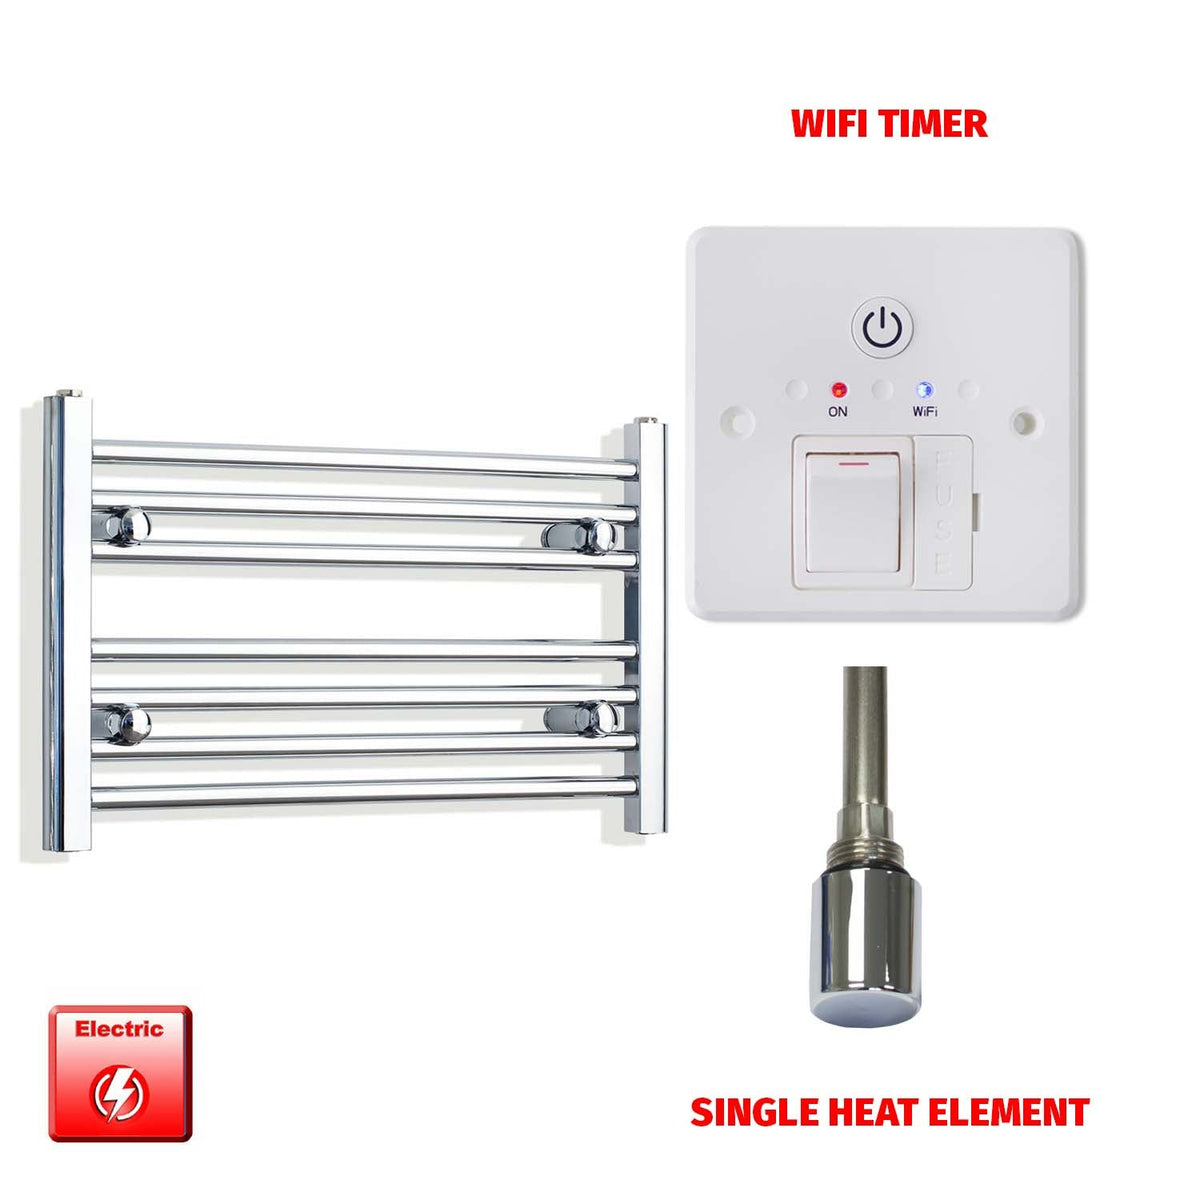 400 x 600 Pre-Filled Electric Heated Towel Radiator Straight or Curved Chrome Single heat element wifi timer